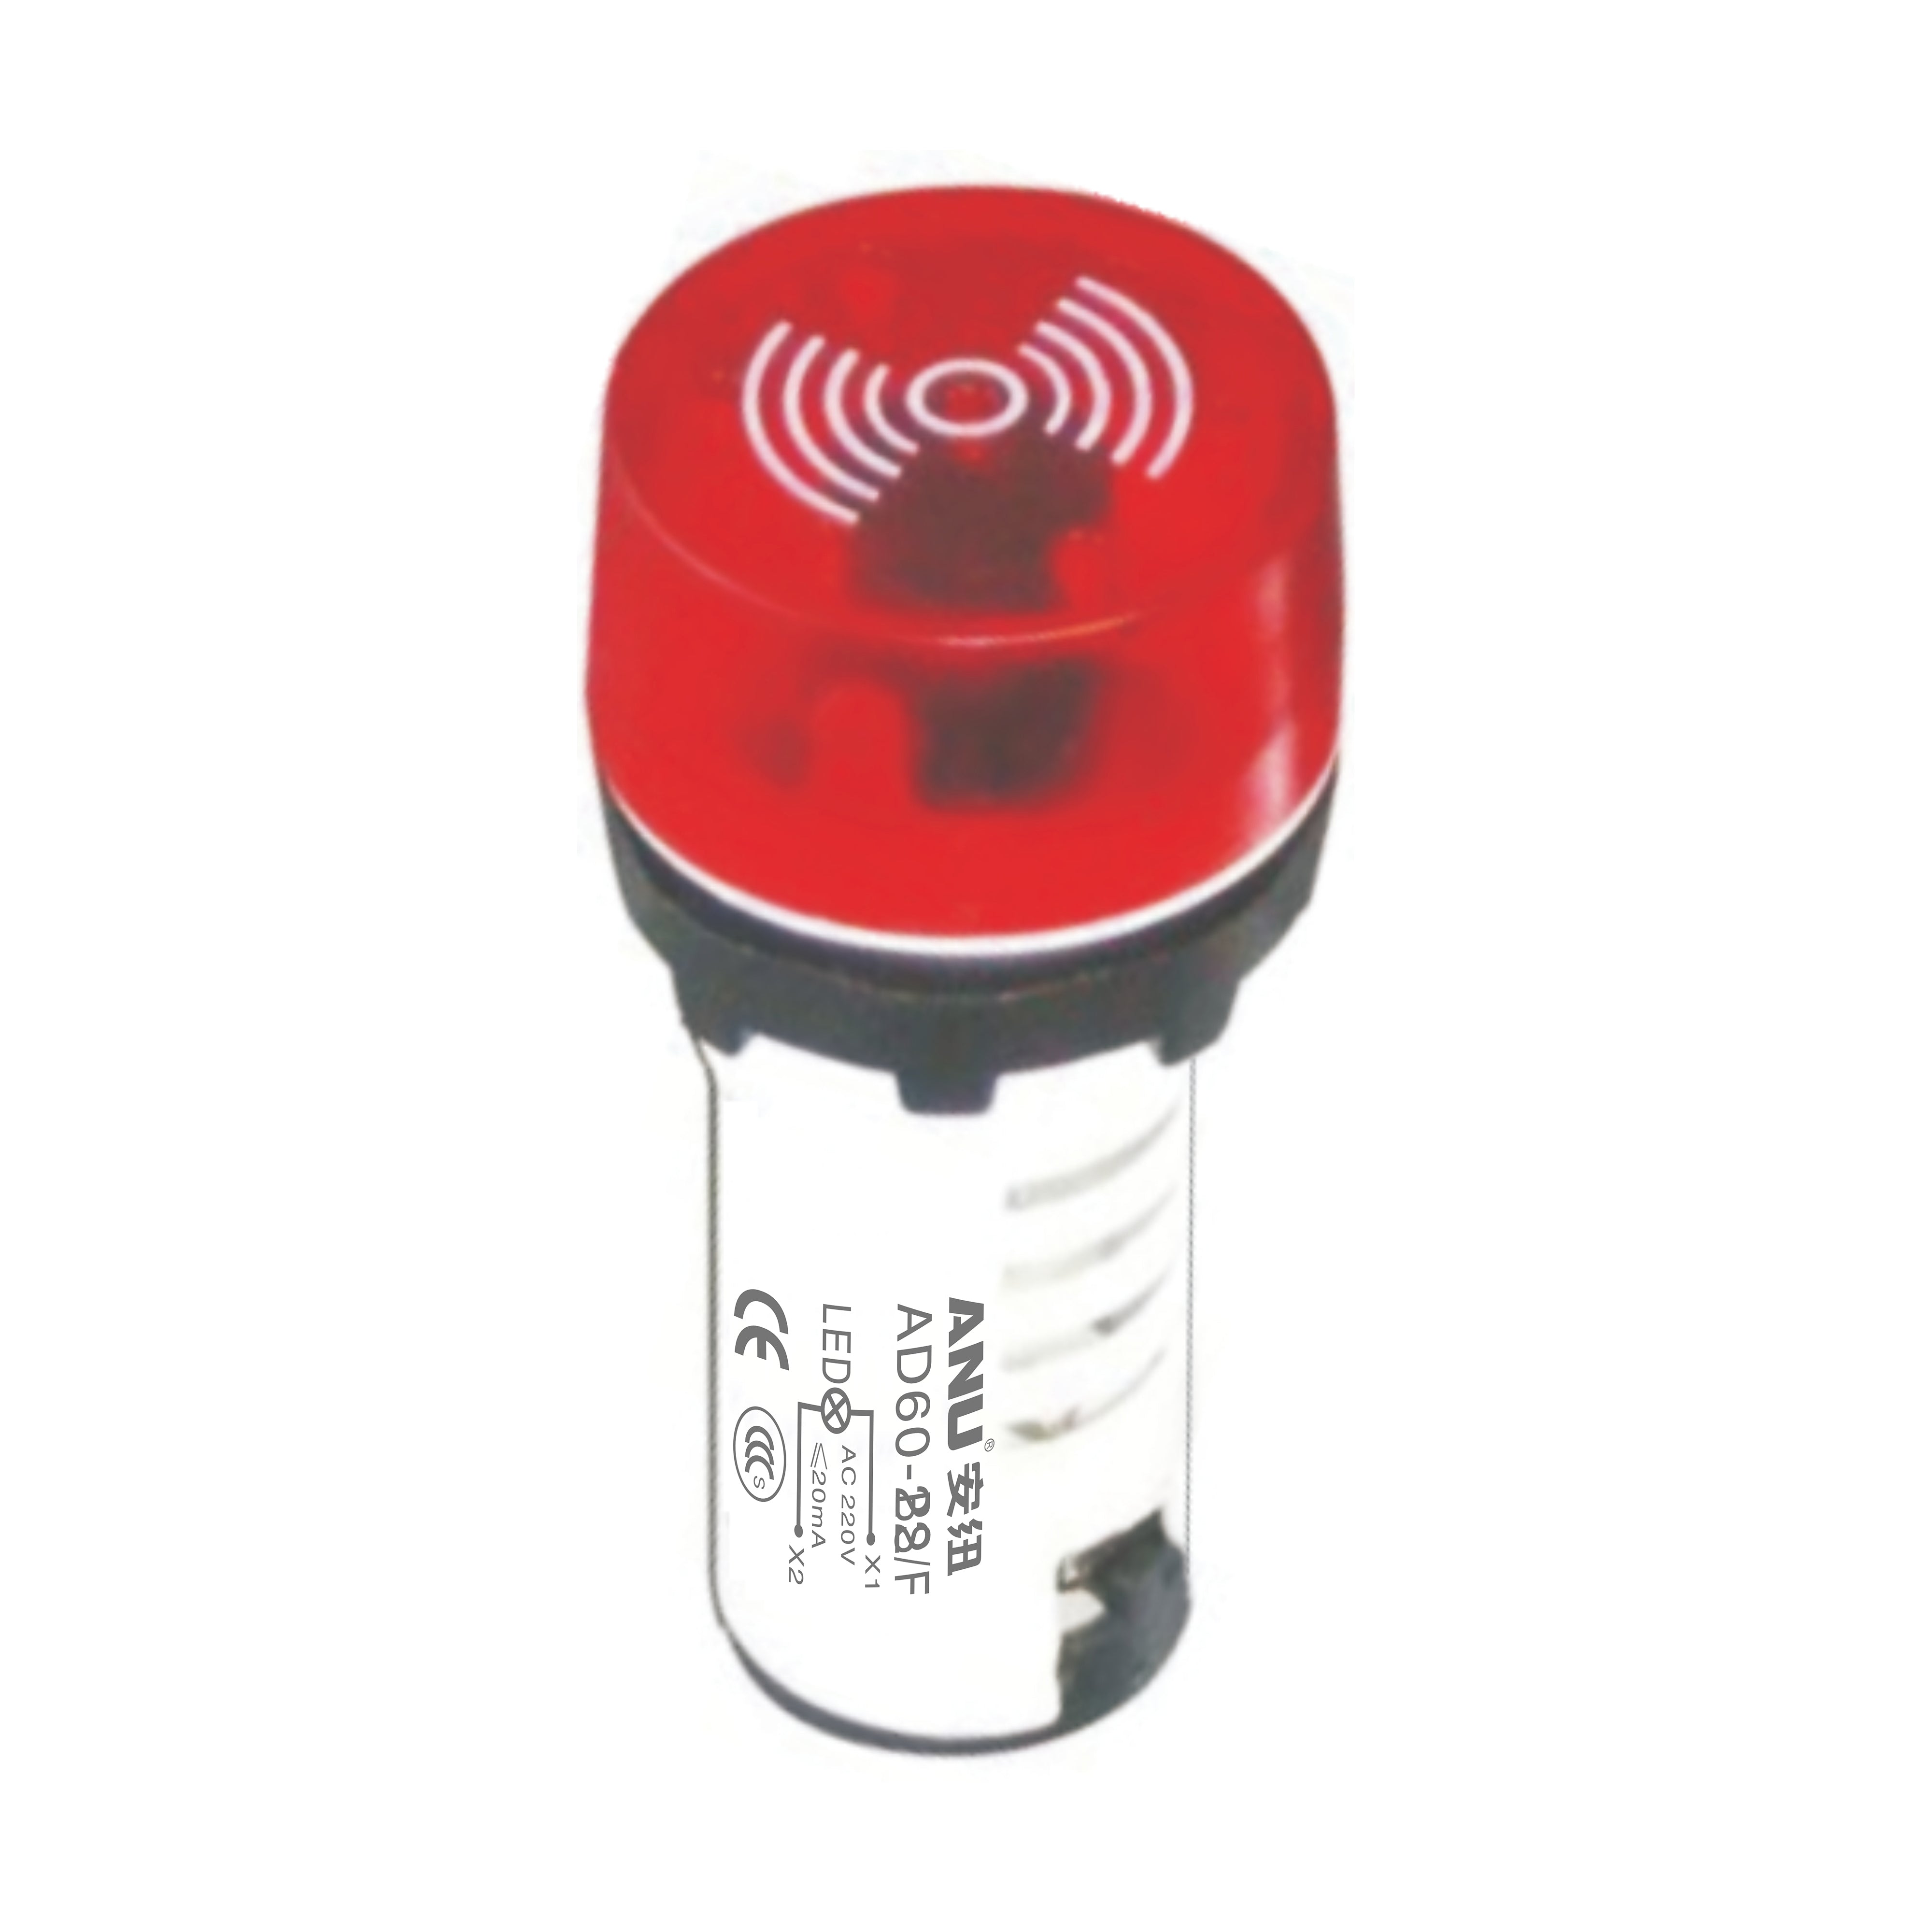 22mm Buzzer with Flashing White Shell Red